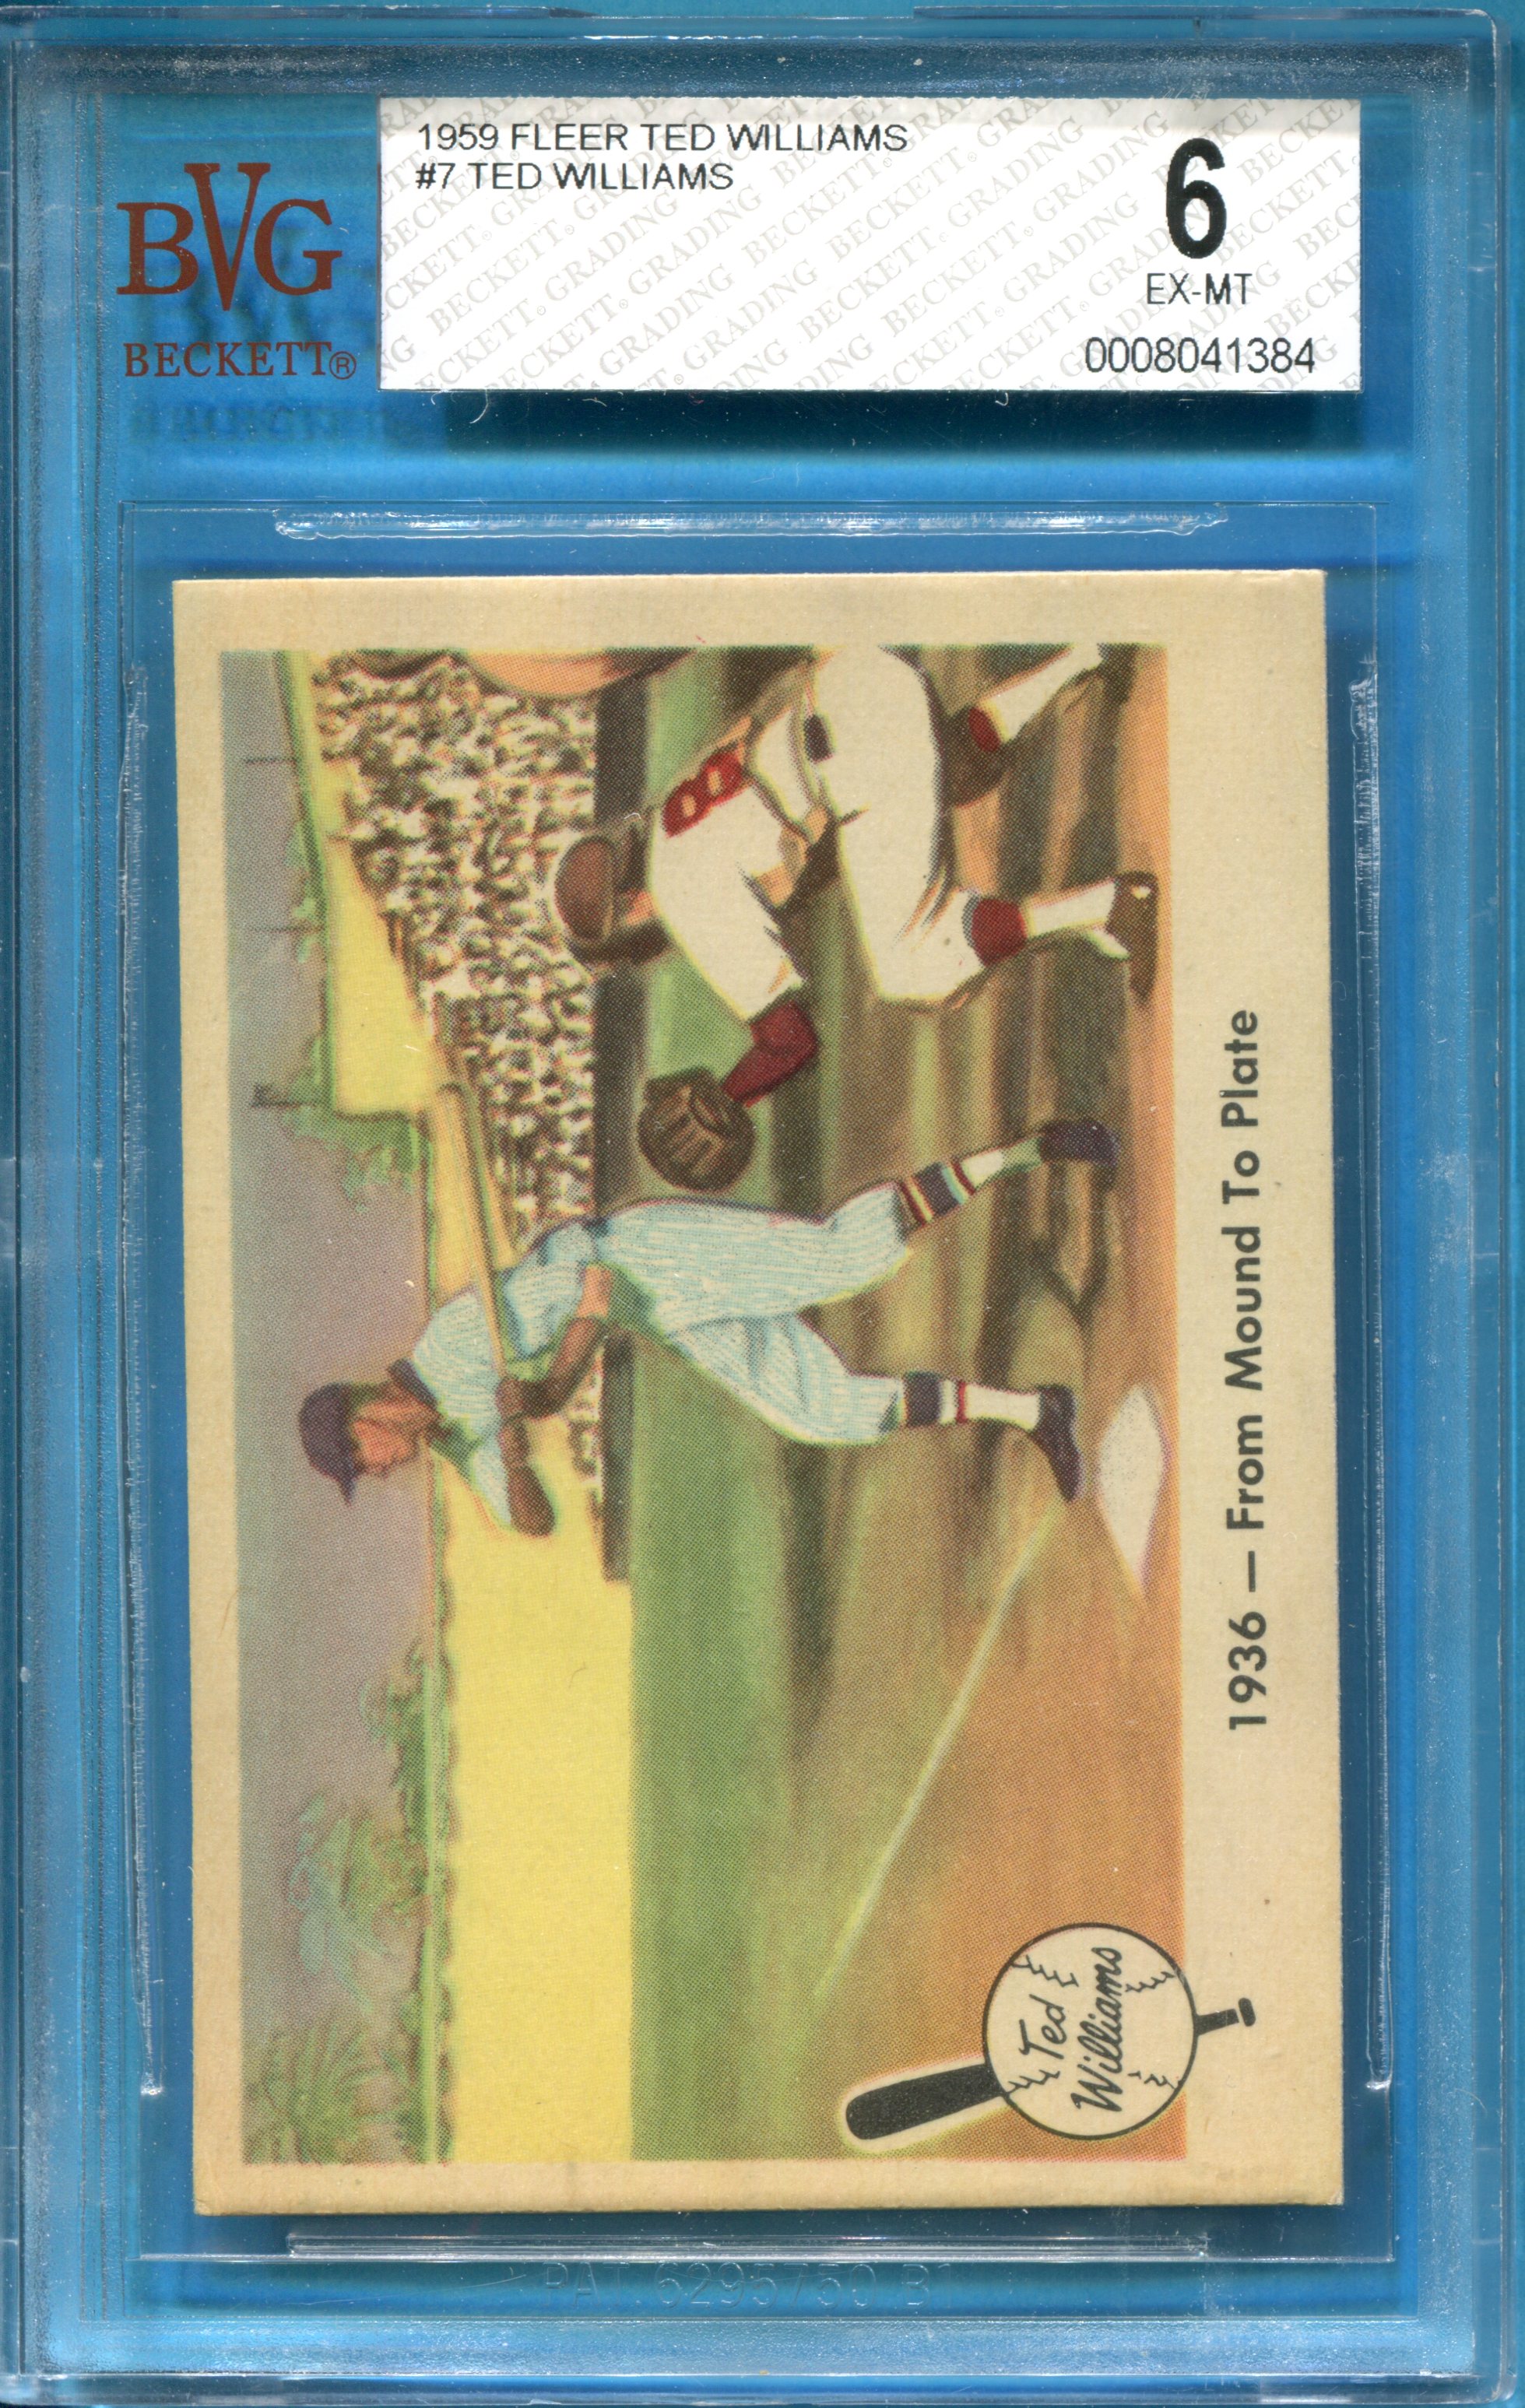 1959 Fleer Ted Williams #7 From Mound to Plate